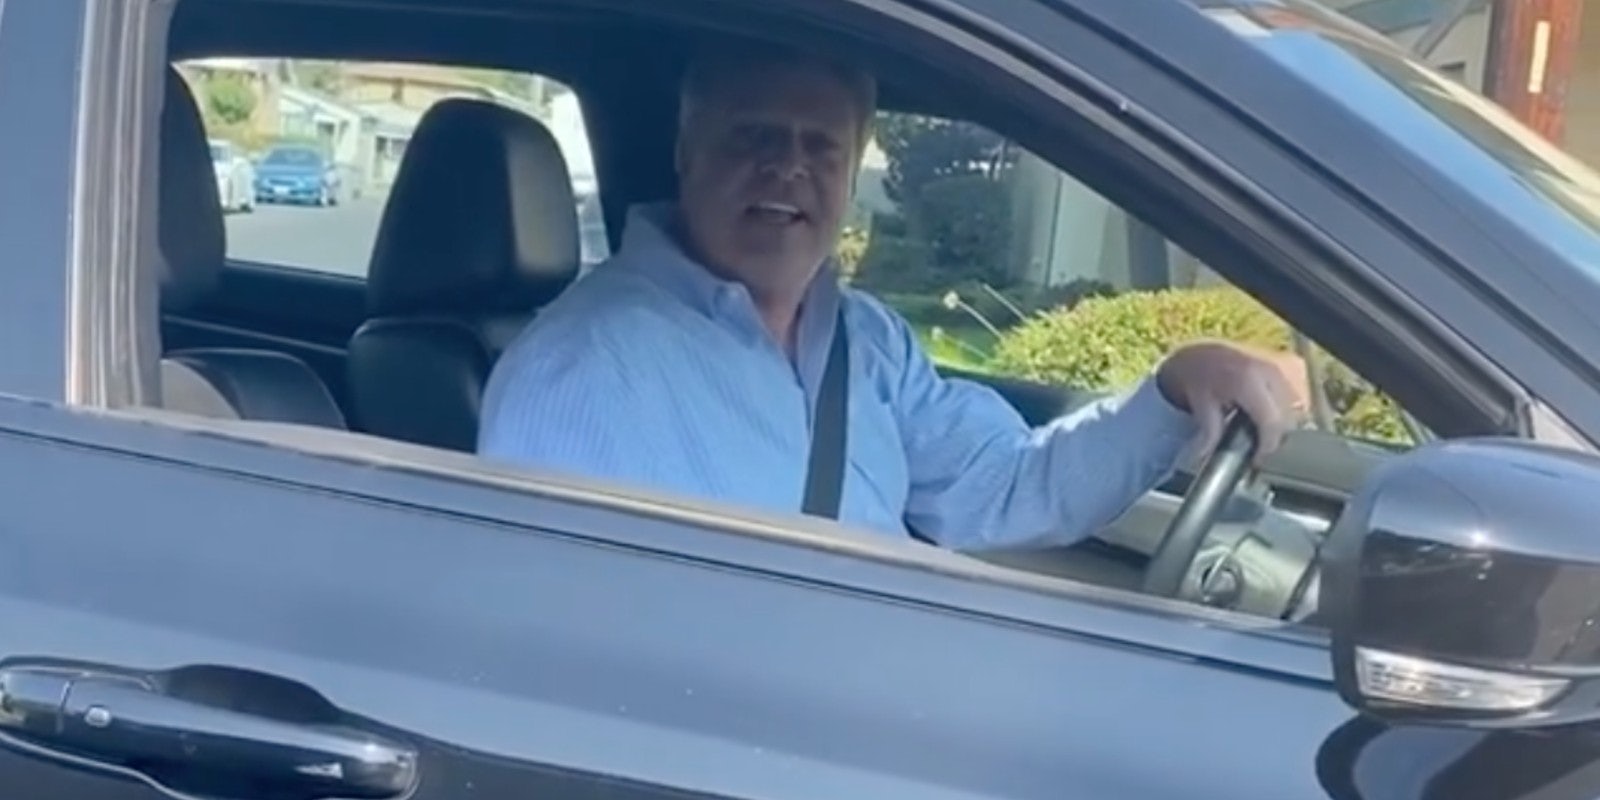 White man who reportedly introduced himself as off-duty cop seen hurling N-word at Black driver